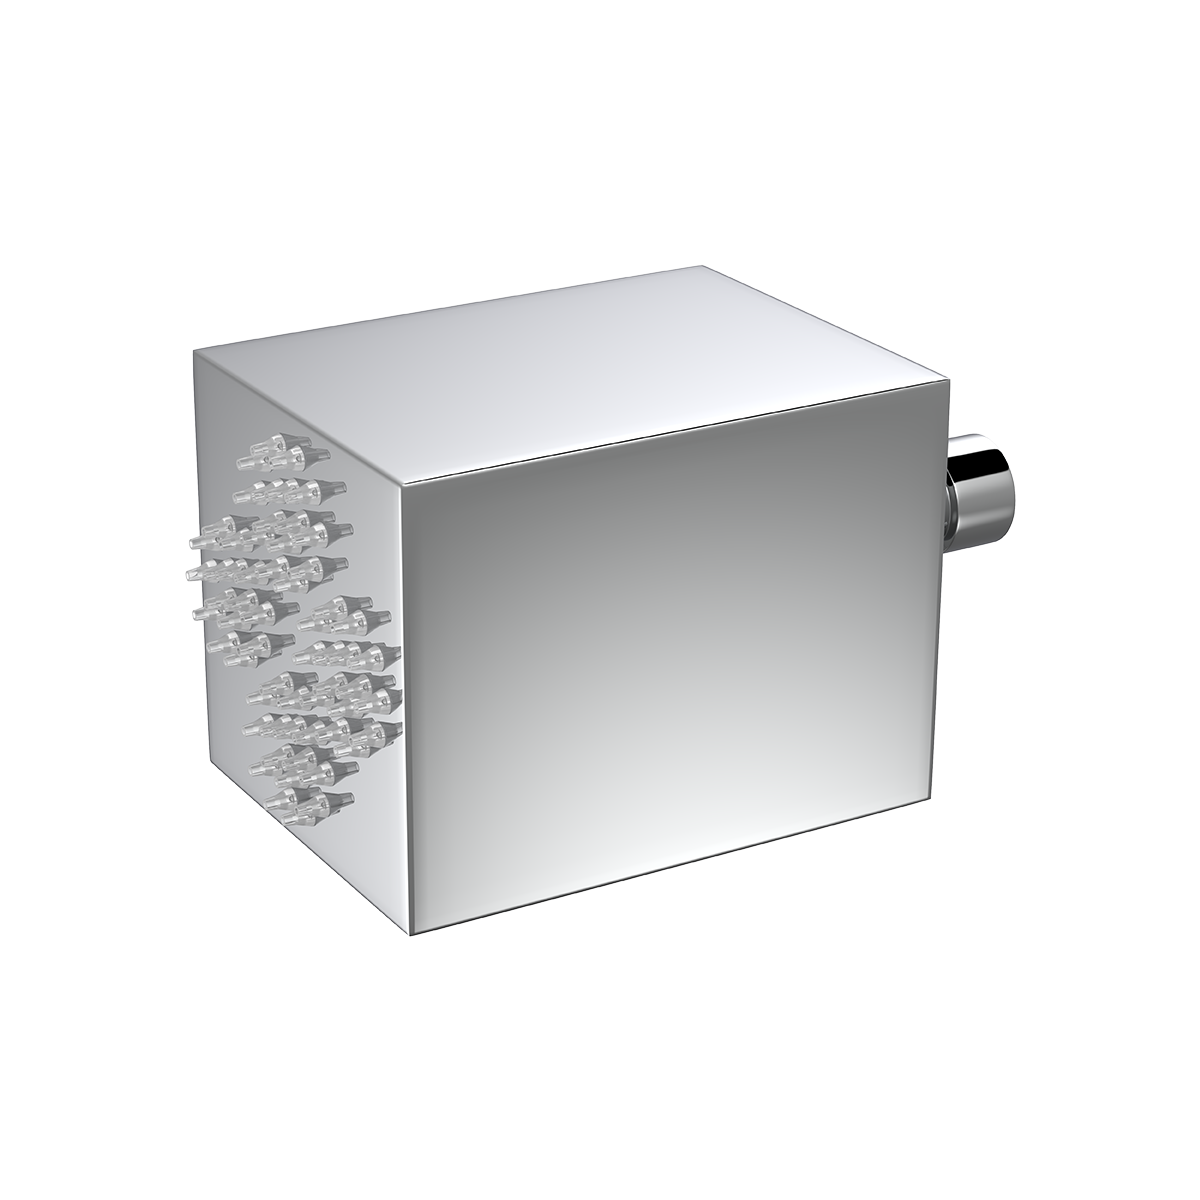 SS Overhead Shower Square (Chrome Plated)